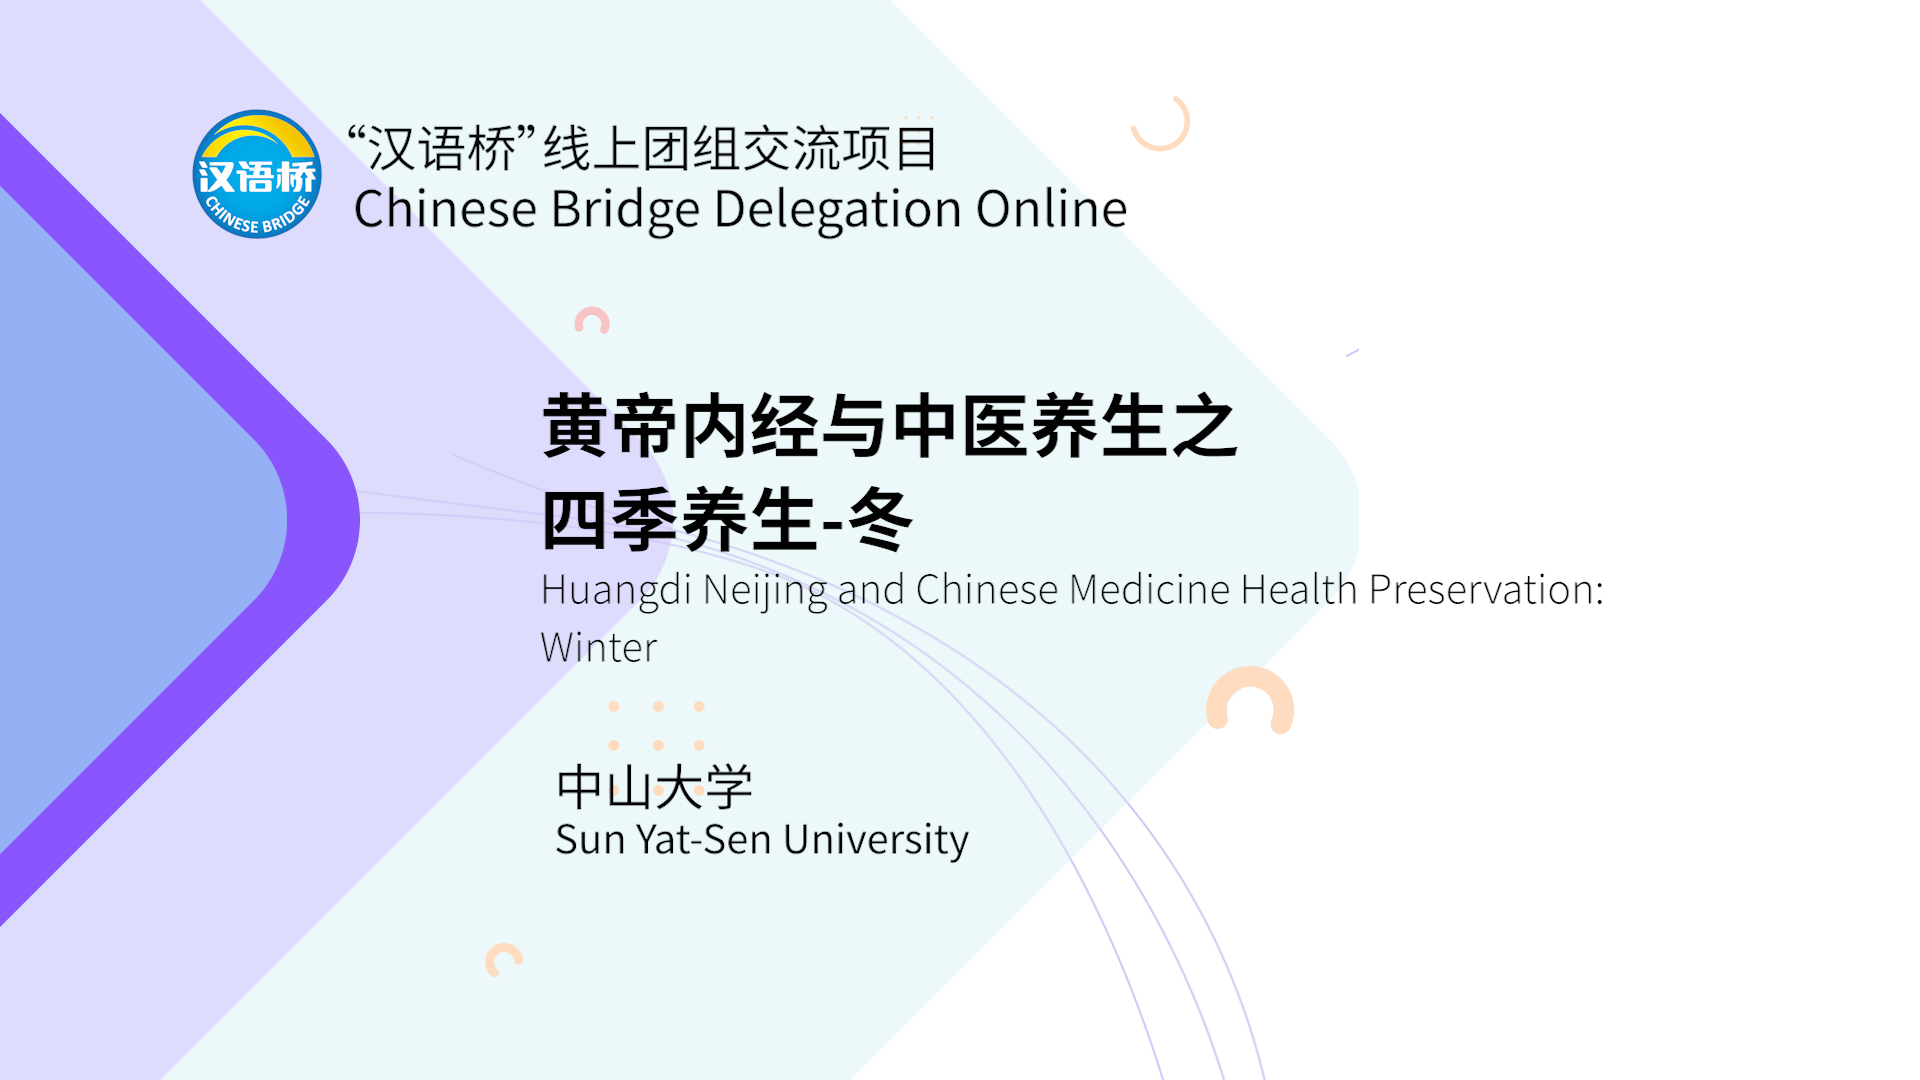 Huangdi Neijing and Chinese Medicine Health Preservation-Winter